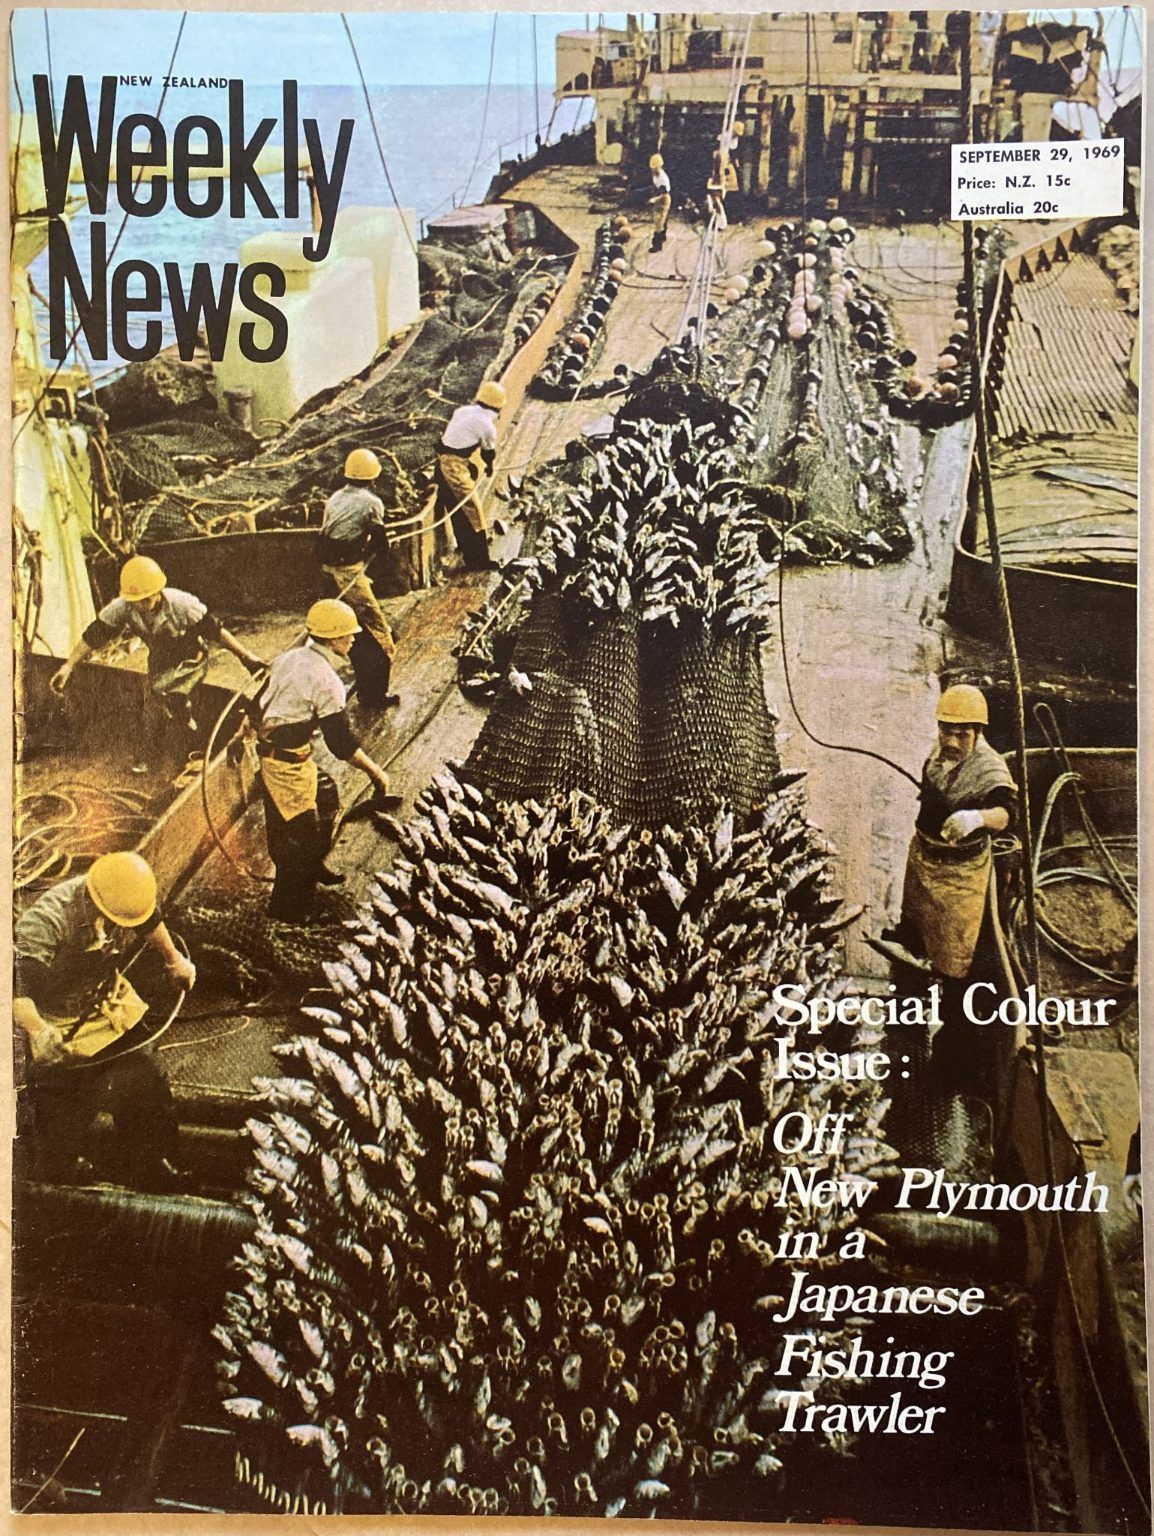 OLD NEWSPAPER: New Zealand Weekly News, No. 5522, 29 September 1969